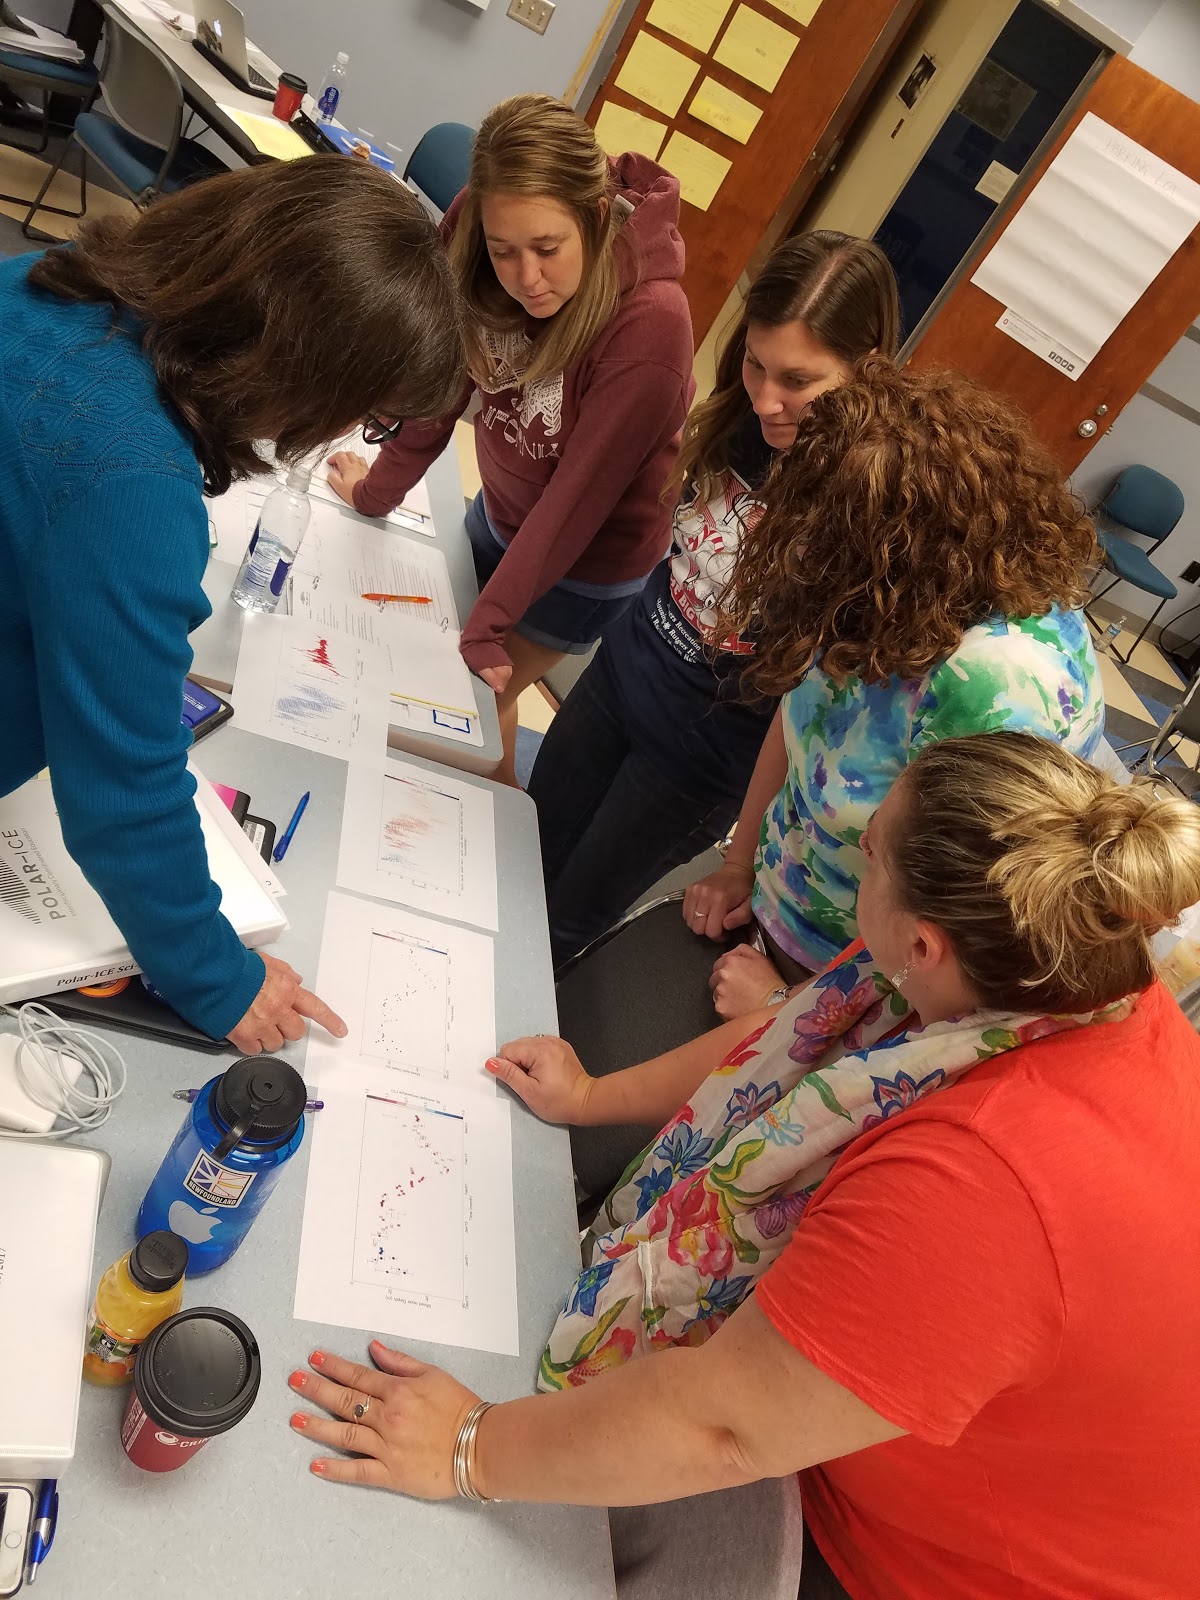 K-12 teachers stand around a table looking at some graphs